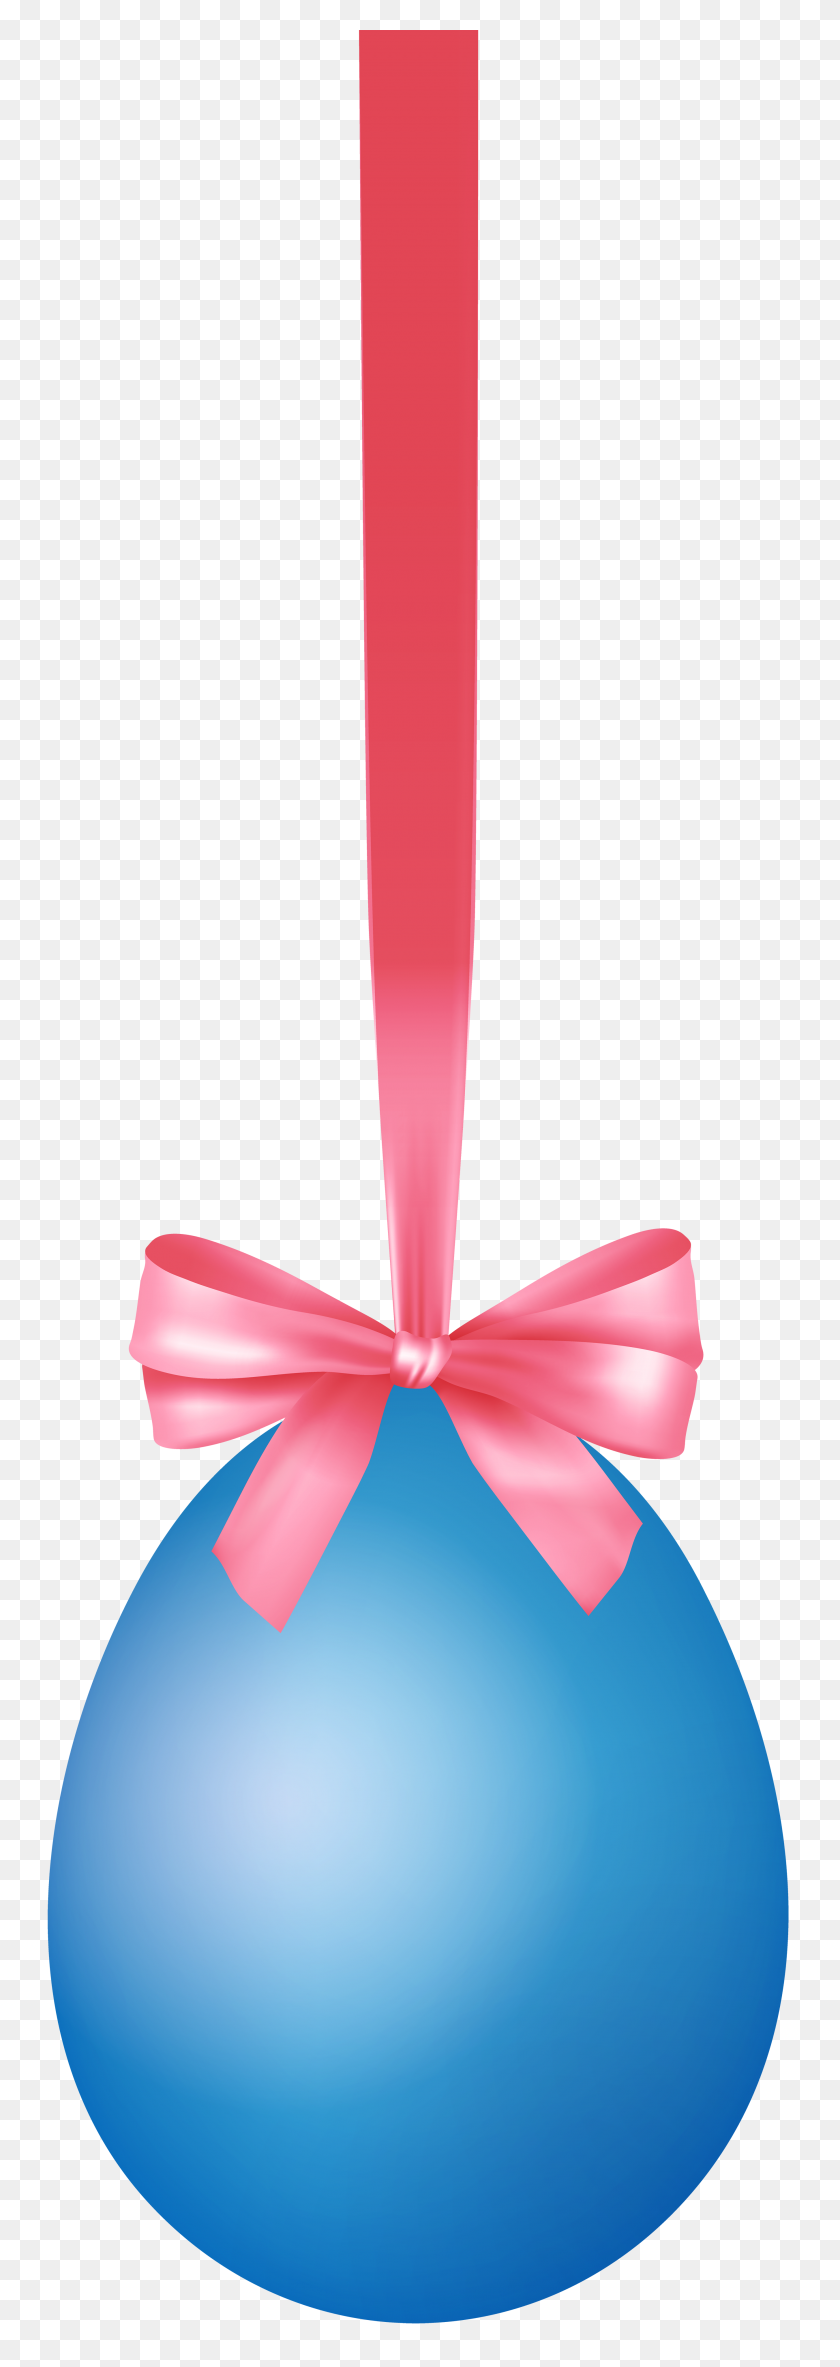 2704x8000 Blue Hanging Easter Egg With Bow Transparent Clip Art Image - Easter Clipart Transparent